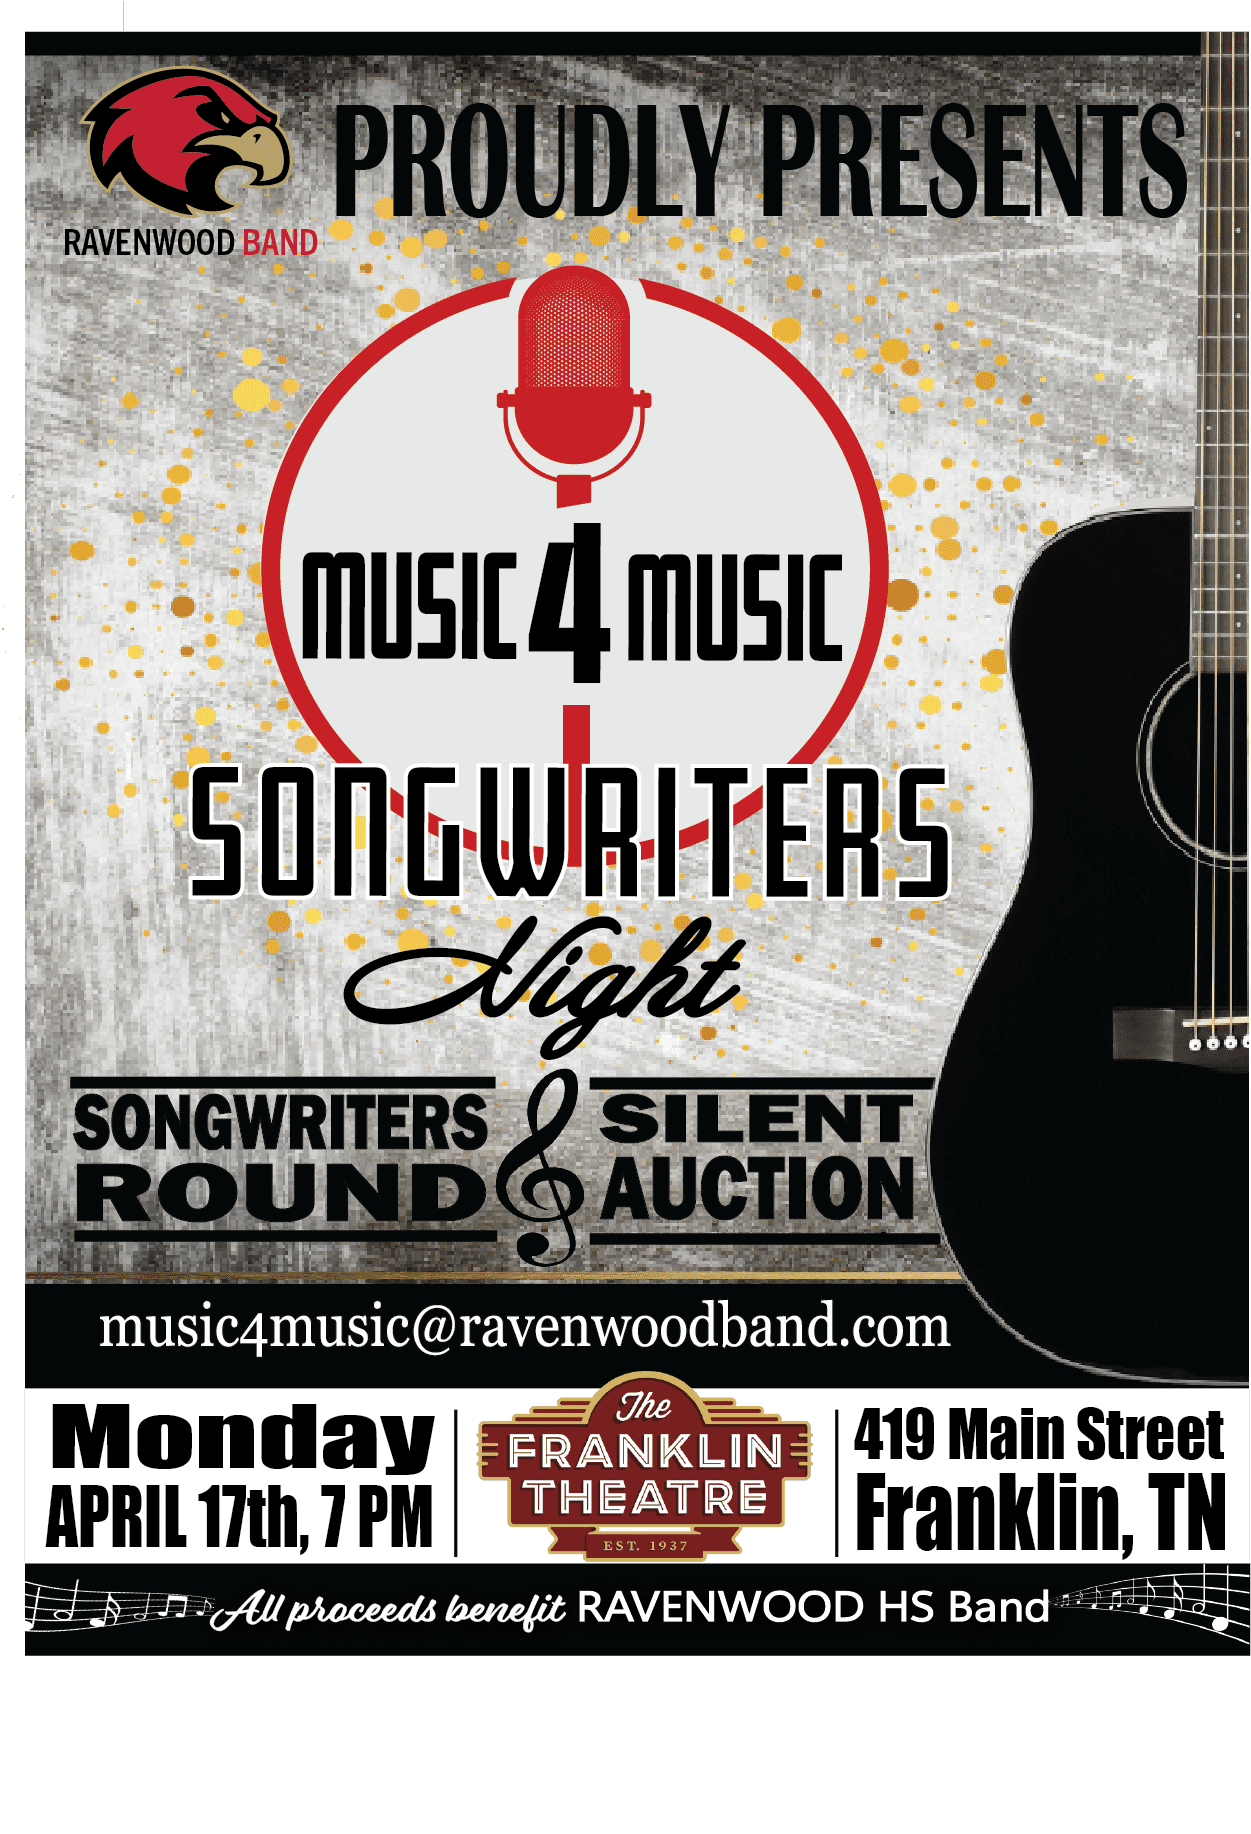 Music 4 Music Songwriters Night in Franklin, TN at The Franklin Theatre.